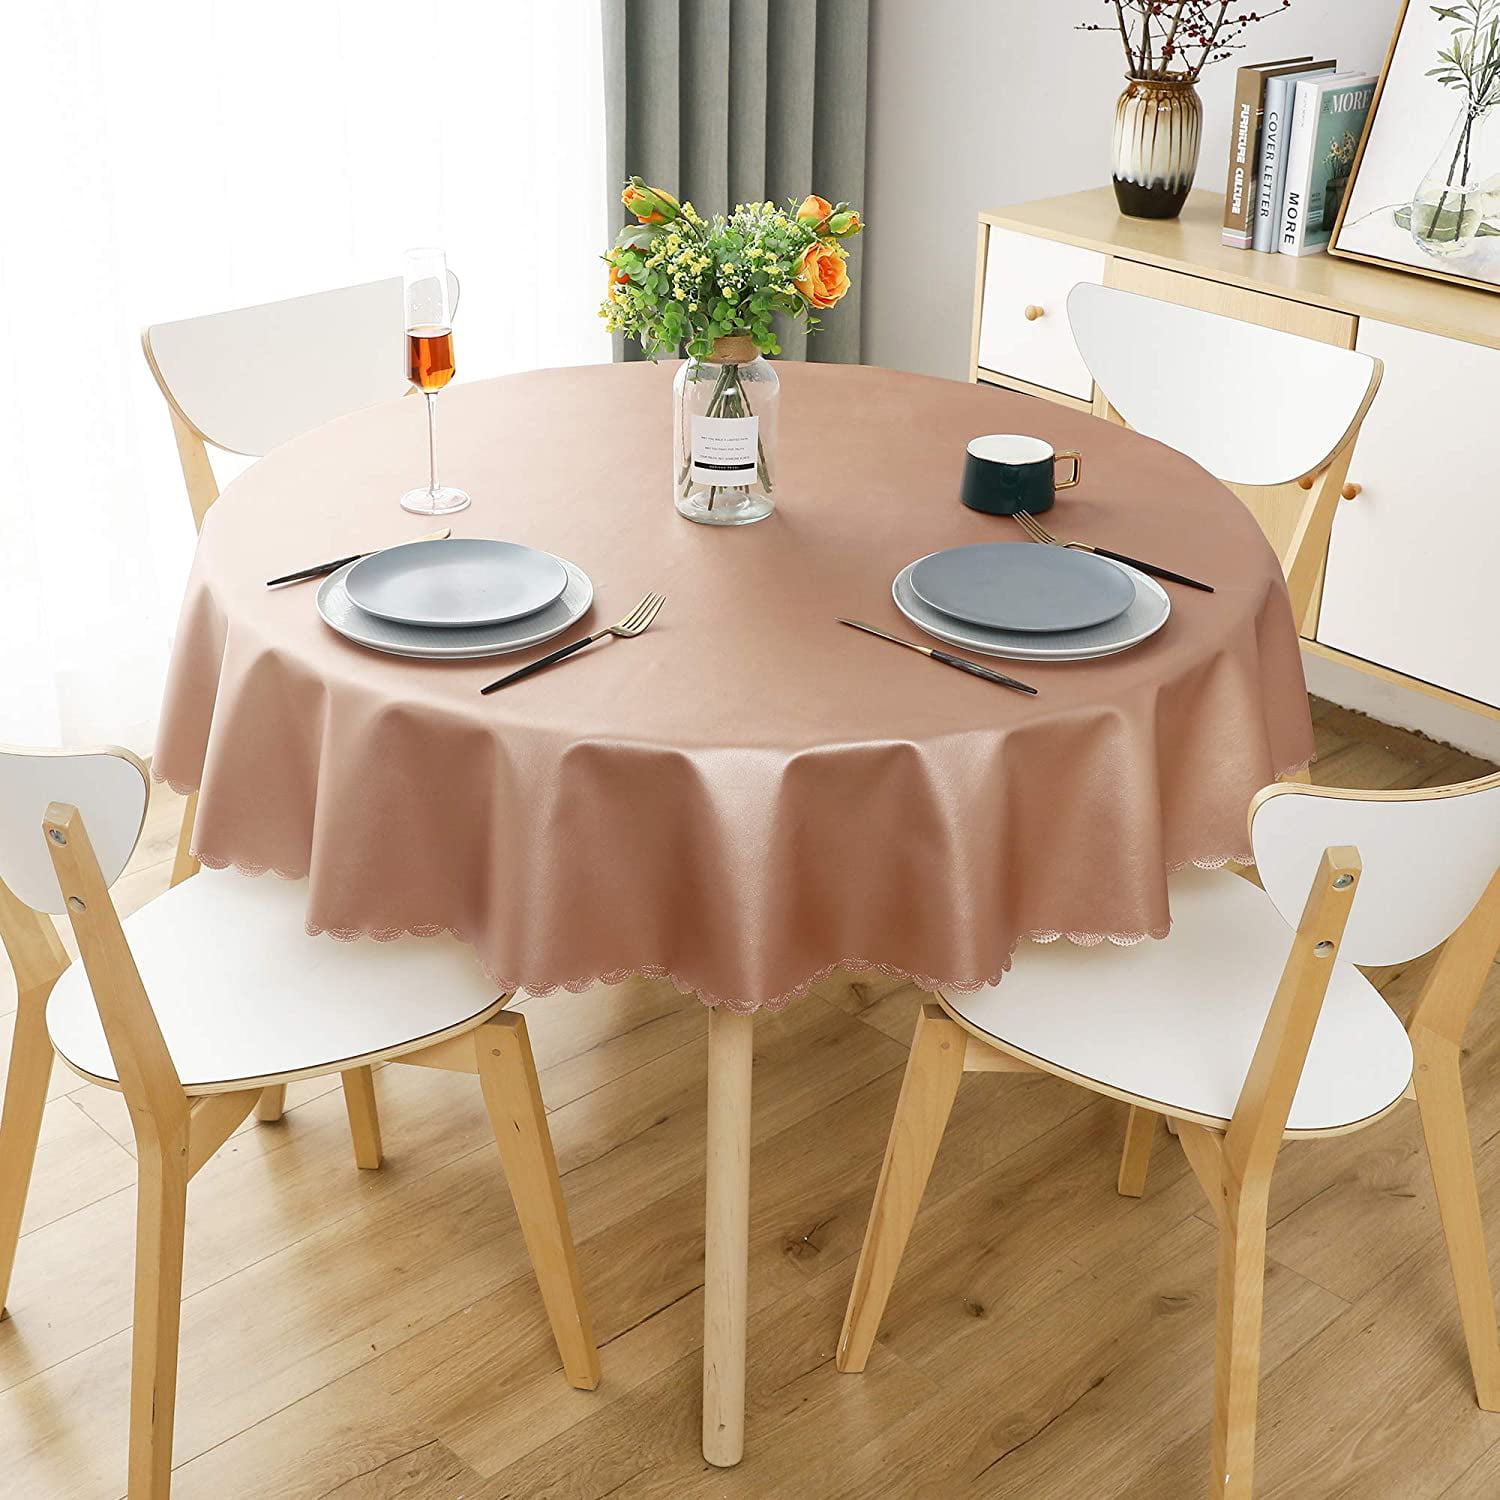 Details about   Round Polyester Tablecloth Fitted Stretch Table Cover Wedding Banquet Party 